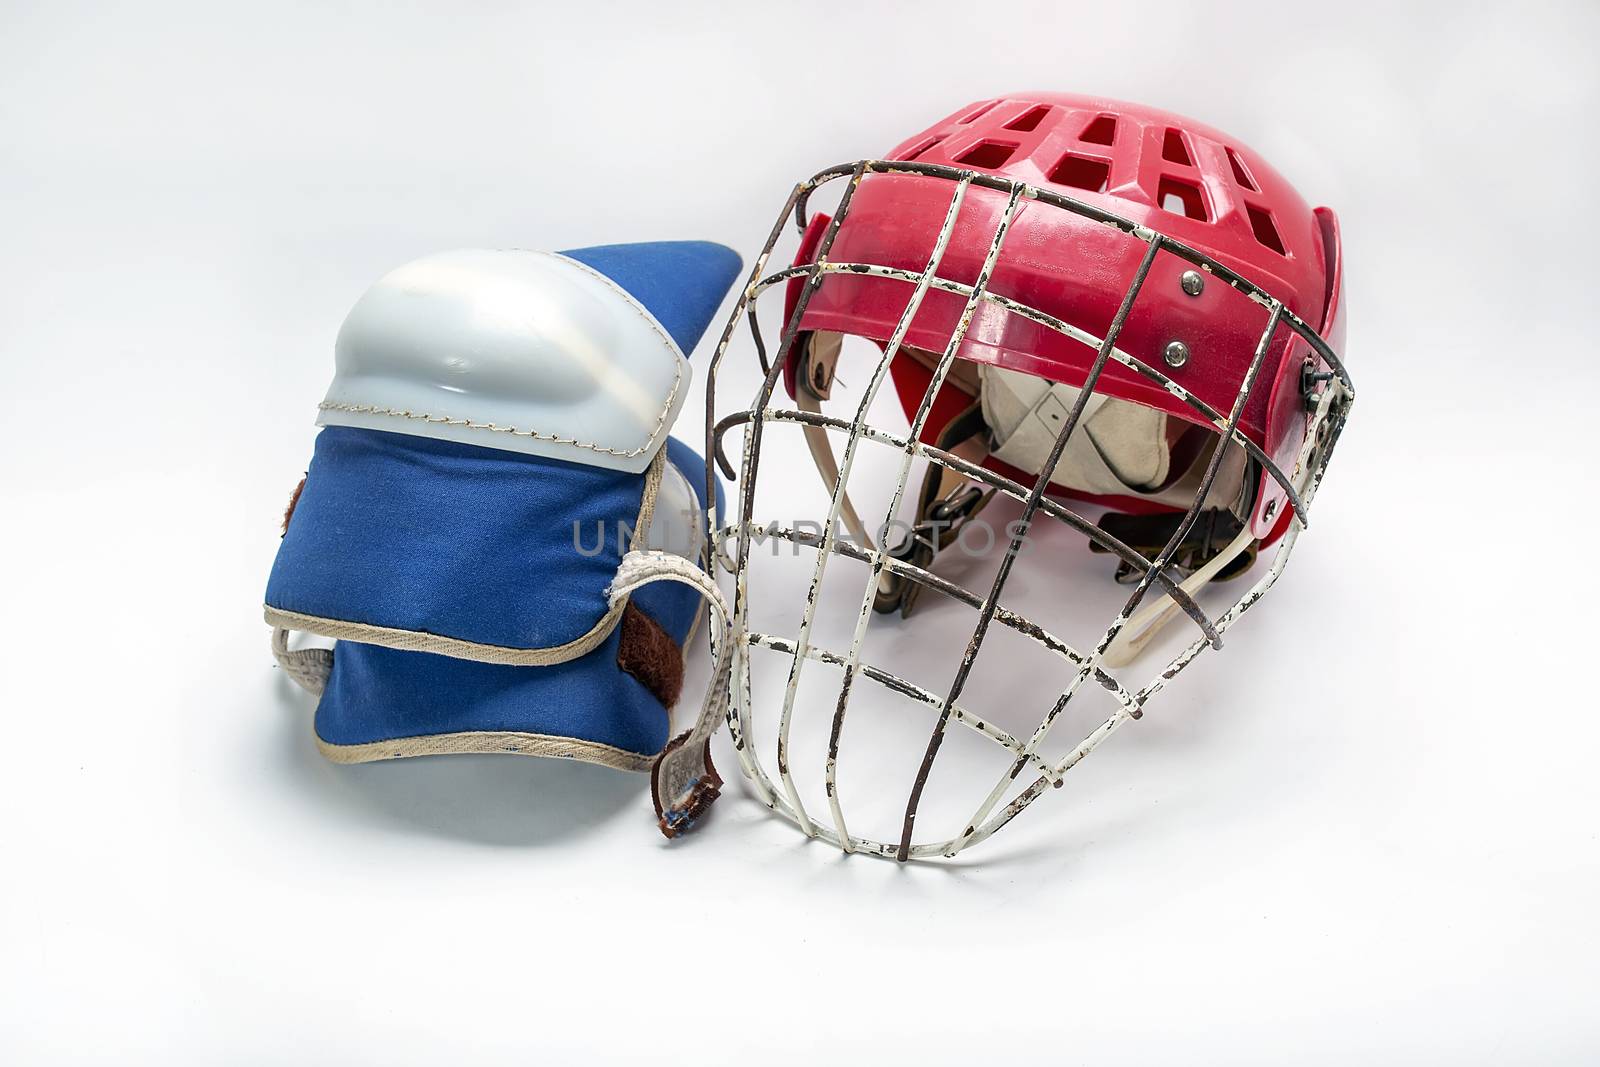 Hockey gloves,helmet and puck lay a white background isolated by 977_ReX_977